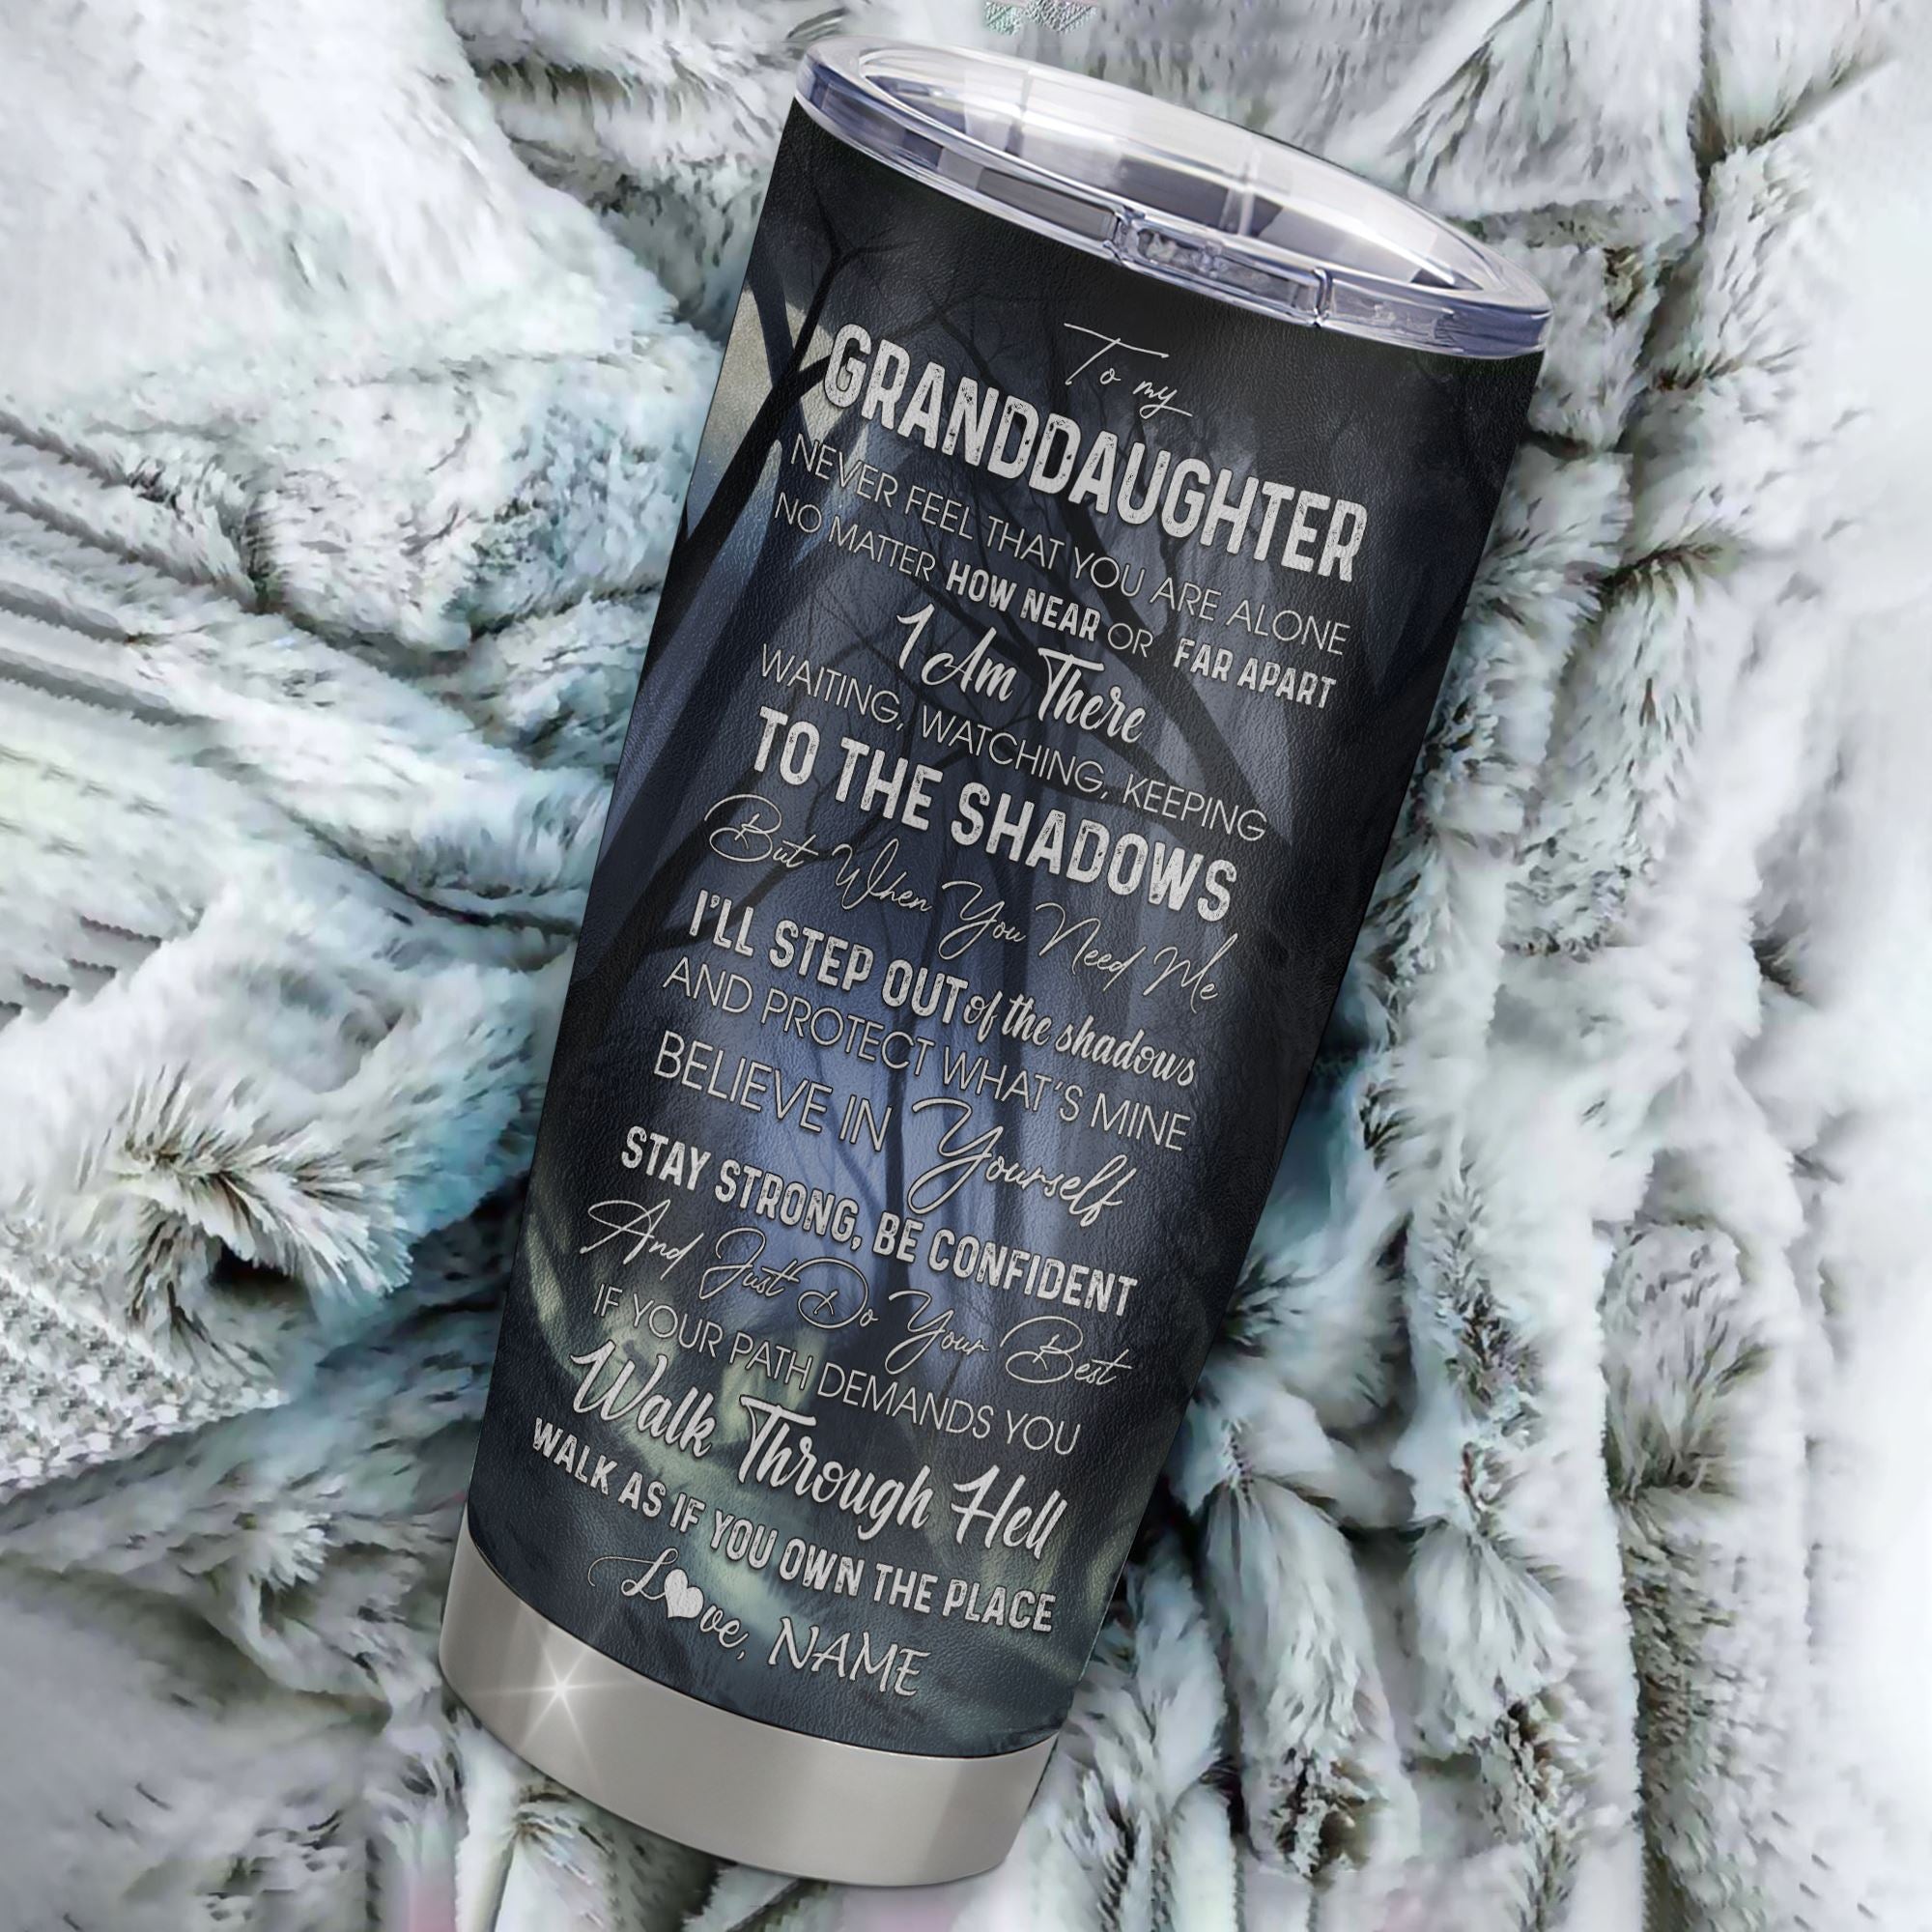 Personalized_To_My_Granddaughter_Tumbler_From_Grandma_Grandpa_Stainless_Steel_Cup_Never_Feel_You_Are_Alone_Wolf_Granddaughter_Birthday_Christmas_Travel_Mug_Tumbler_mockup_1.jpg